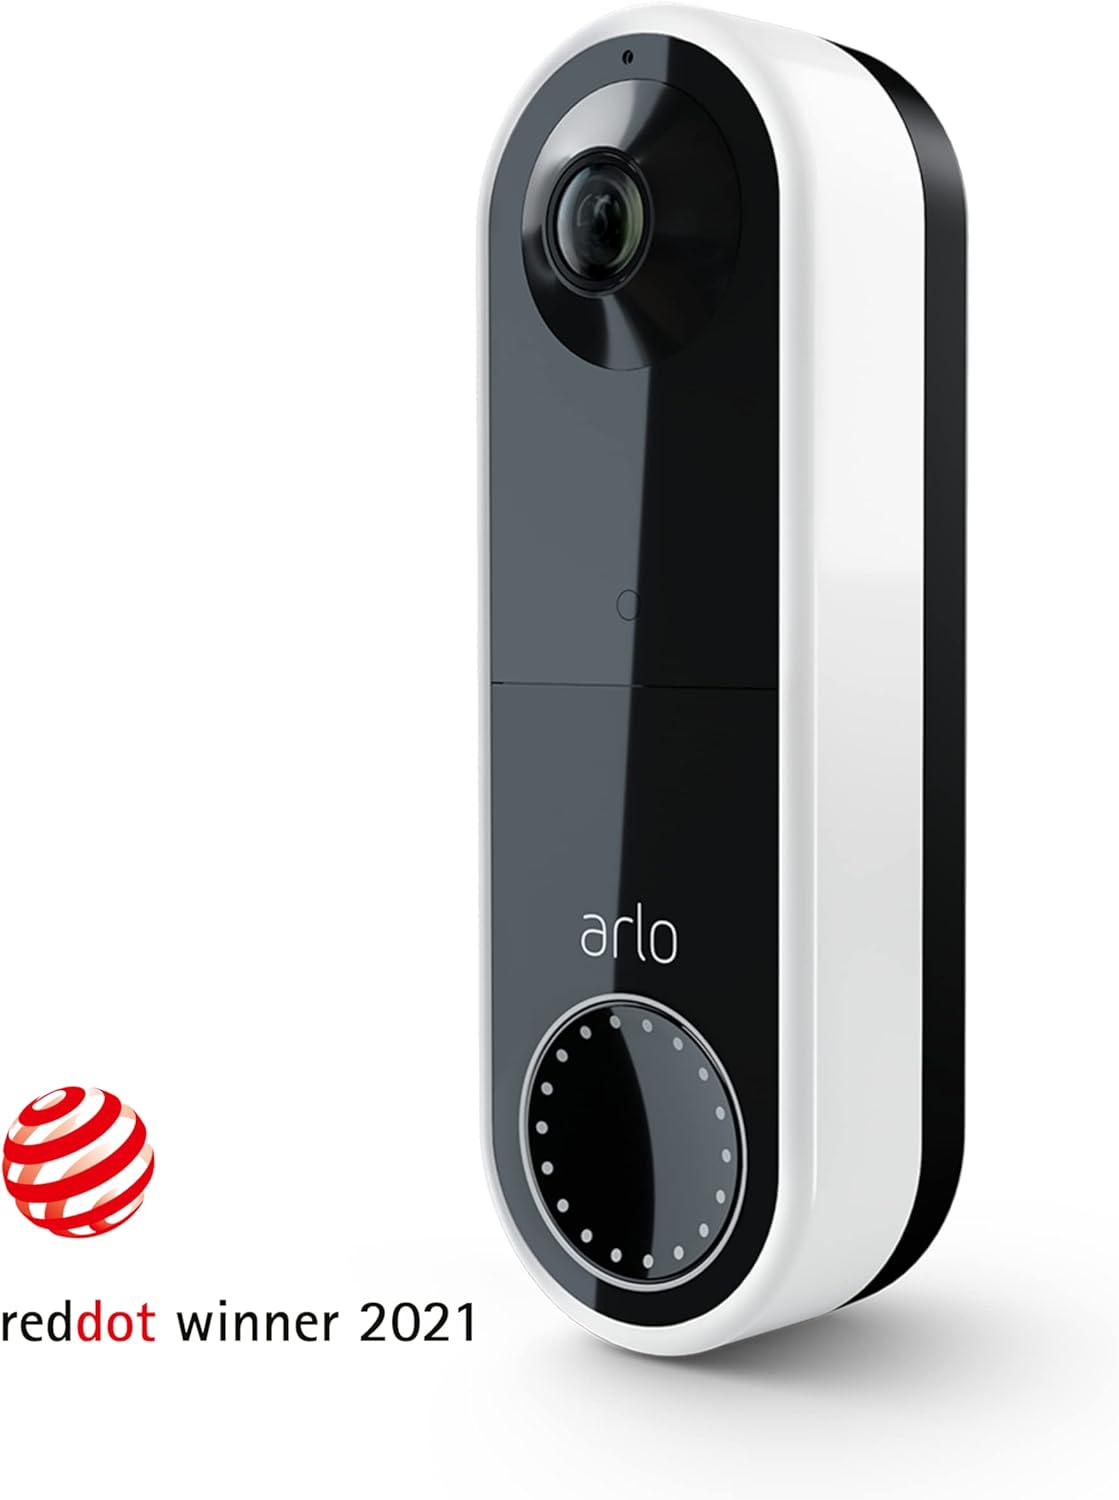 The image shows a Arlo Essential Doorbell. The design of the doorbell is modern and sleek, with a two-tone color scheme, typically white and black. The upper part has a camera lens, presumably for capturing video footage of visitors. Below the lens is what appears to be a motion sensor or part of the camera system. Towards the bottom of the doorbell, there is a large, circular button that is likely used to ring the doorbell.